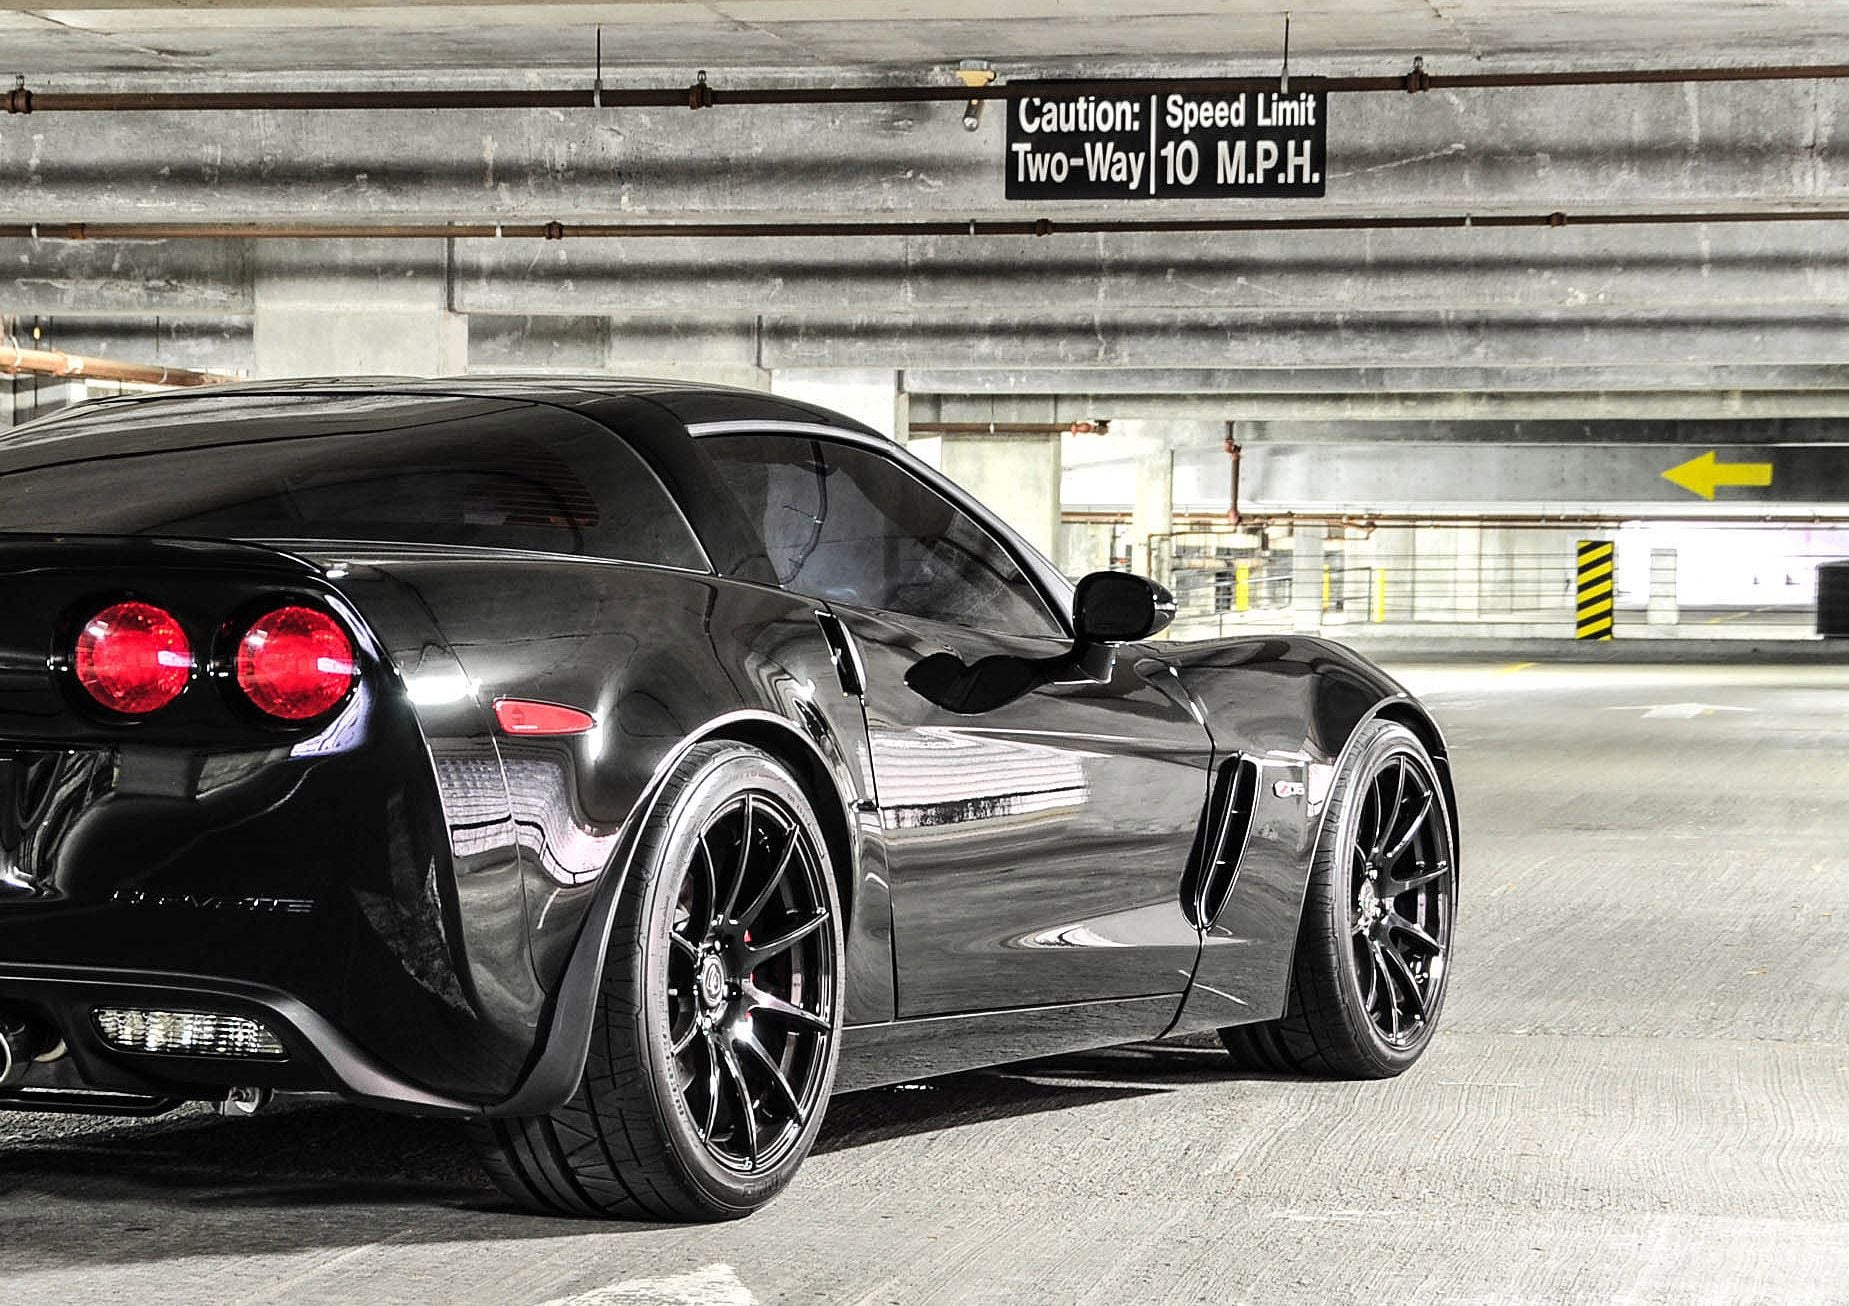 Rotary Forged Light Weight Forgestar Wheels Chevrolet Corvette C5 Stingray.